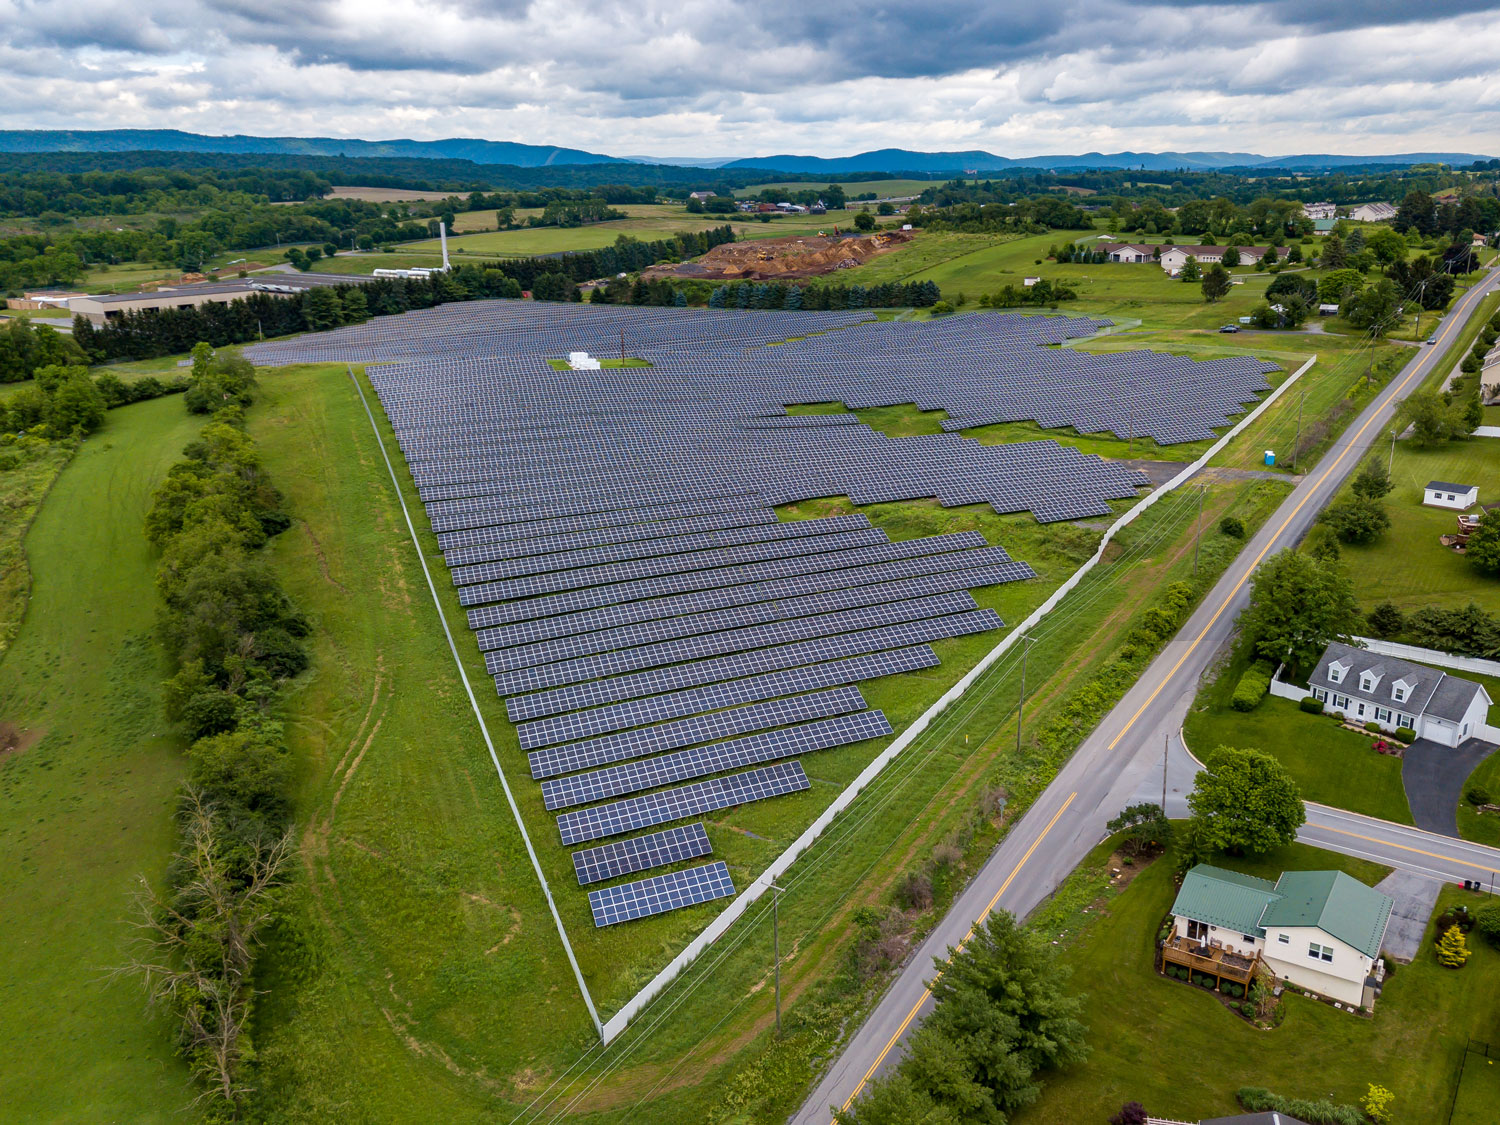 Drone photo that shows the whole 21 acre solar array